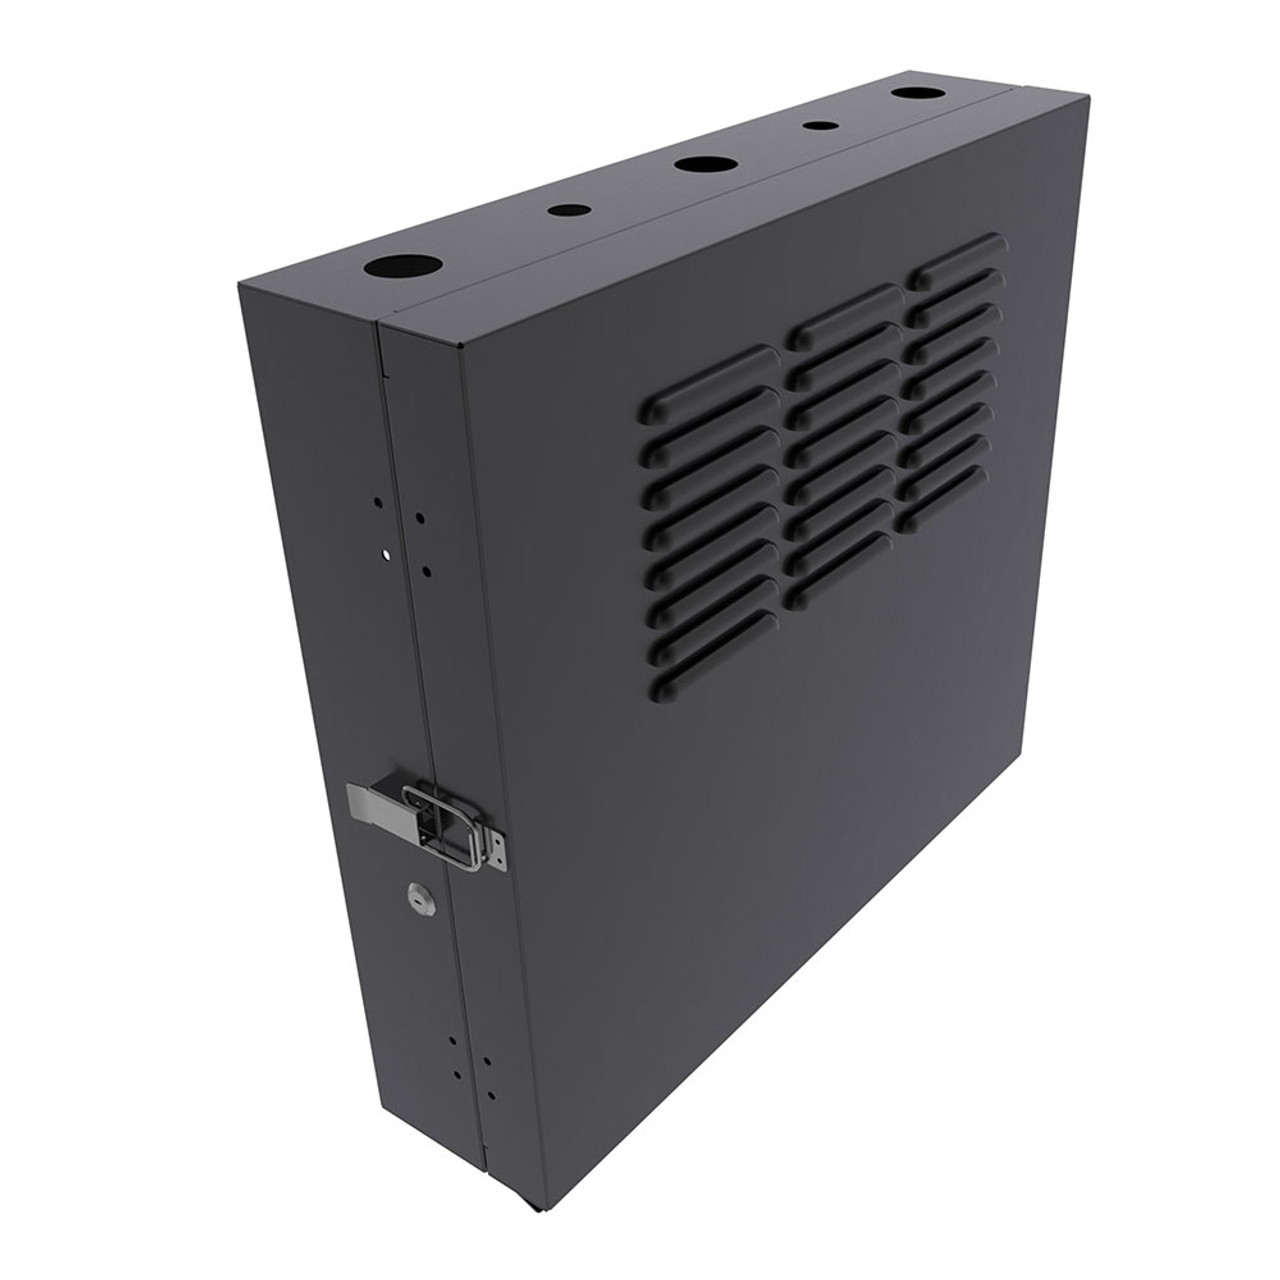 3U Vertical Wall Mount Enclosure, 12.7 inch (325mm) to 15.7 inch (400mm) depth, Cold-rolled Steel, Black